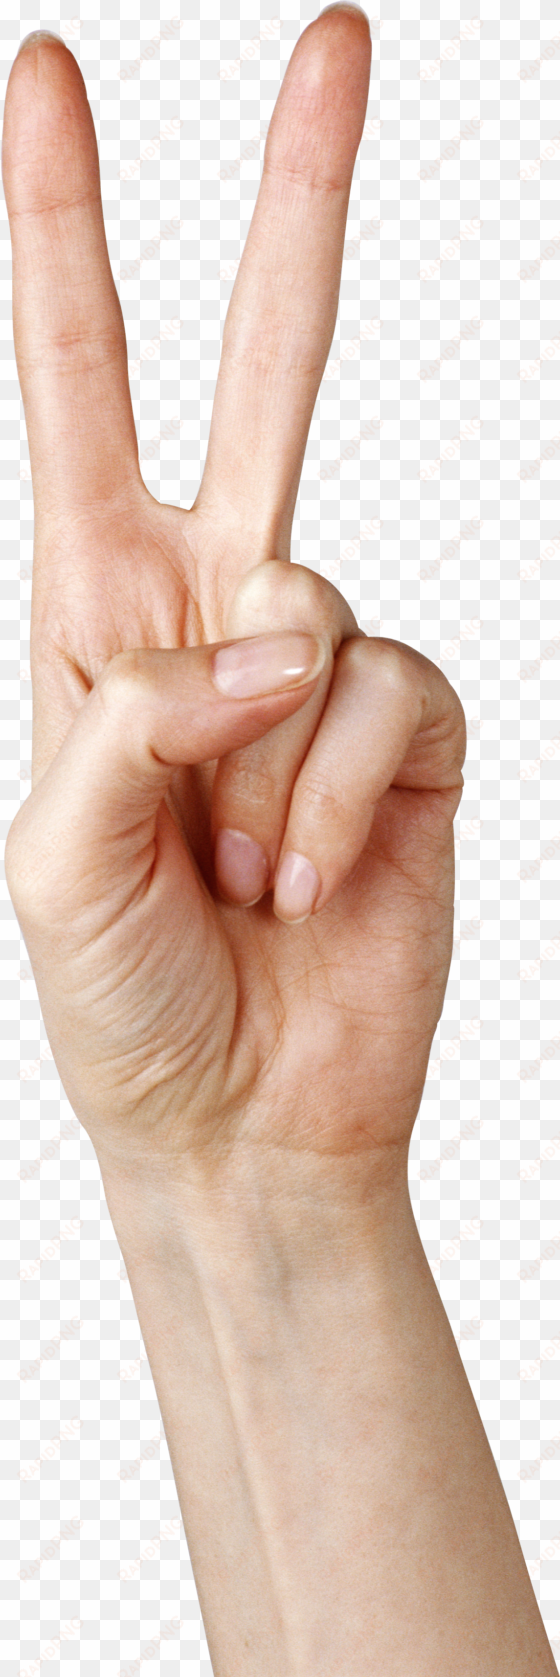 fingers png clipart - hand two finger png